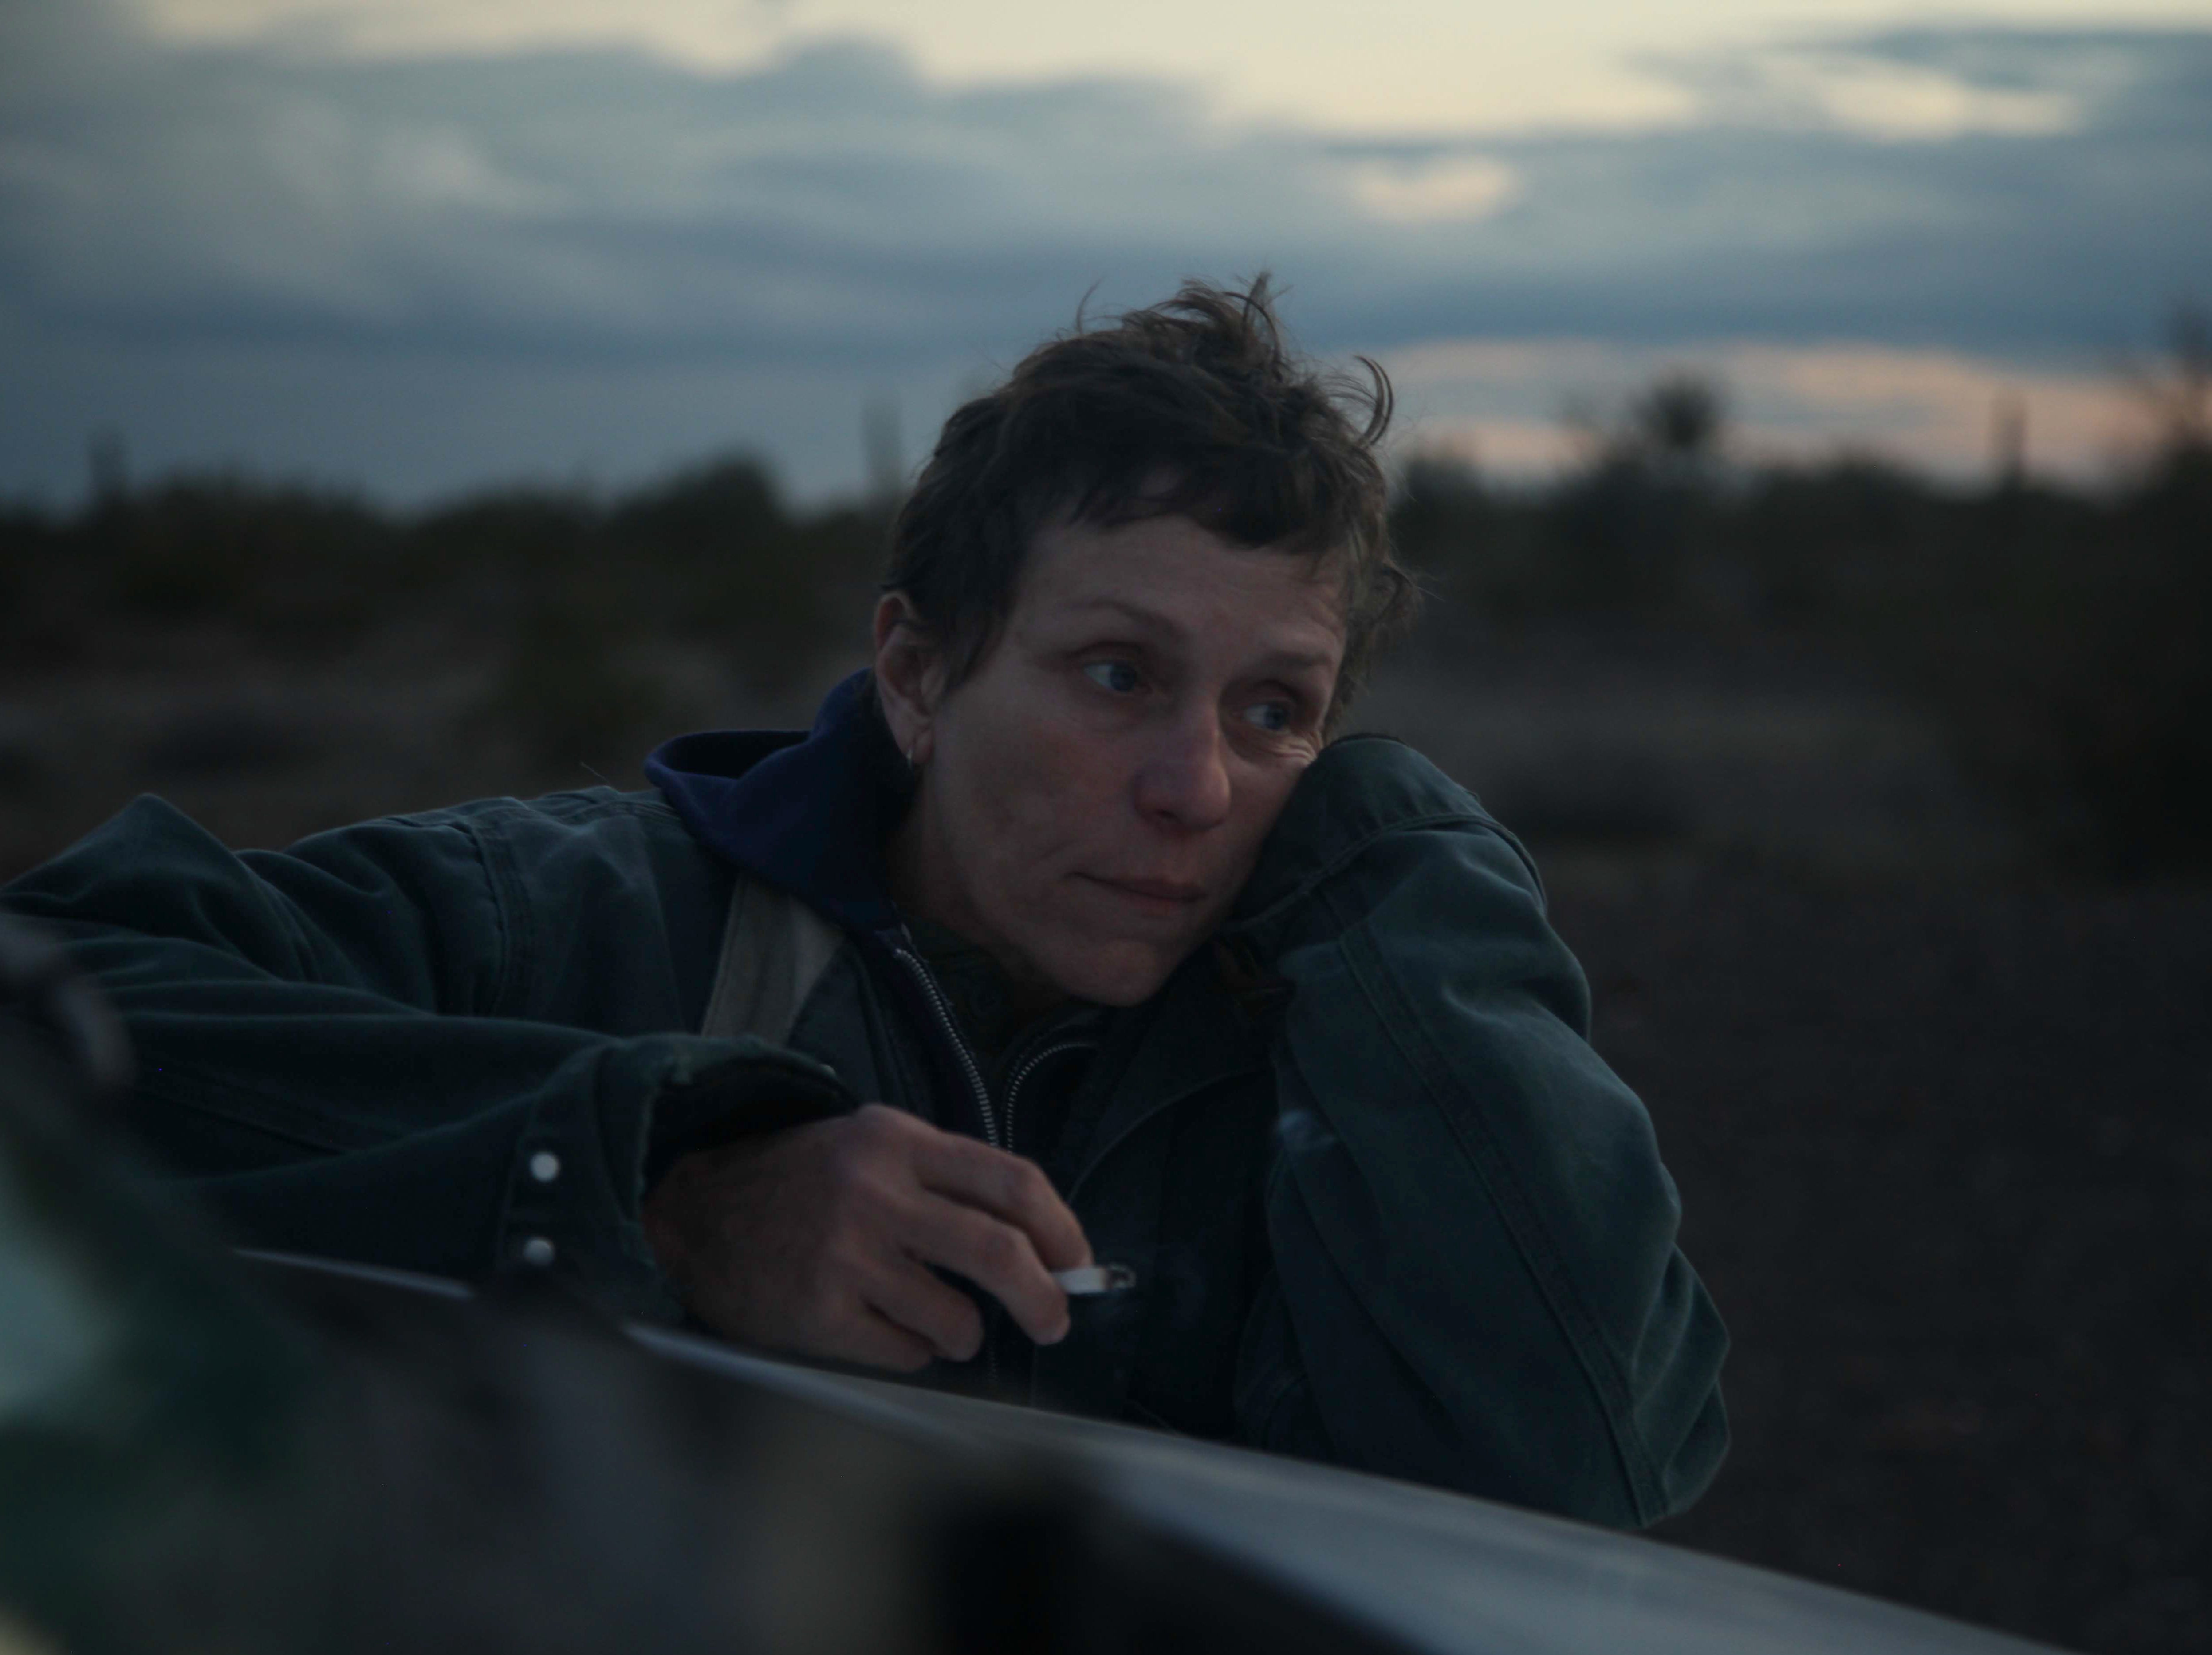 Frances McDormand won an Oscar for ‘Nomadland’ but critics have rounded on the way the film portrays Amazon